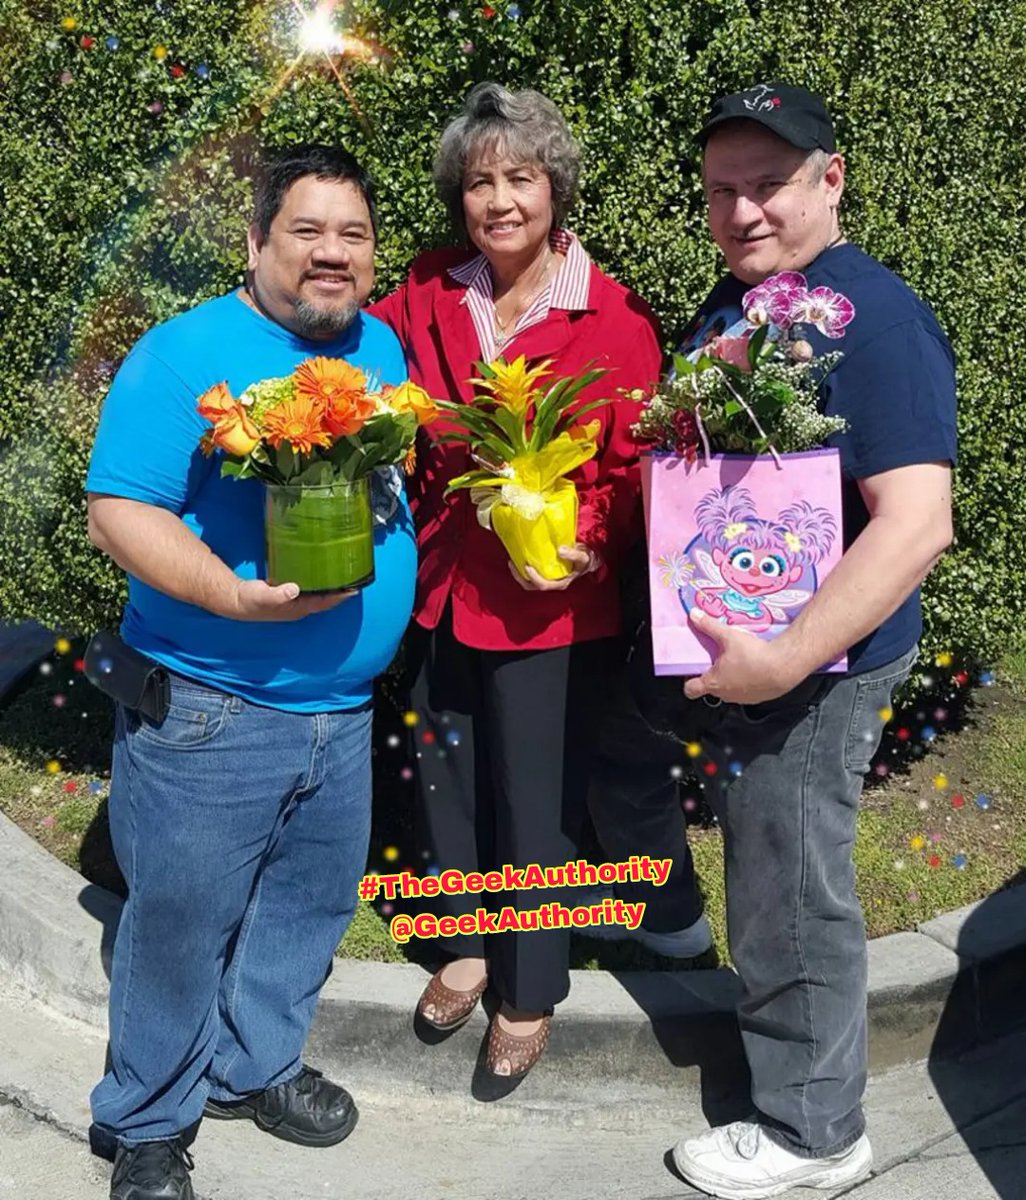 #HappyMothersDay #HappyMothersDay2024 To my #Mom Carmie and Michael's Mom @Angelita and to all our friends and family - Have a #Loving, #Safe and #Healthy holiday! Thanks Moms - we love all of you! ❤️🧡💛💚💙🩵💜